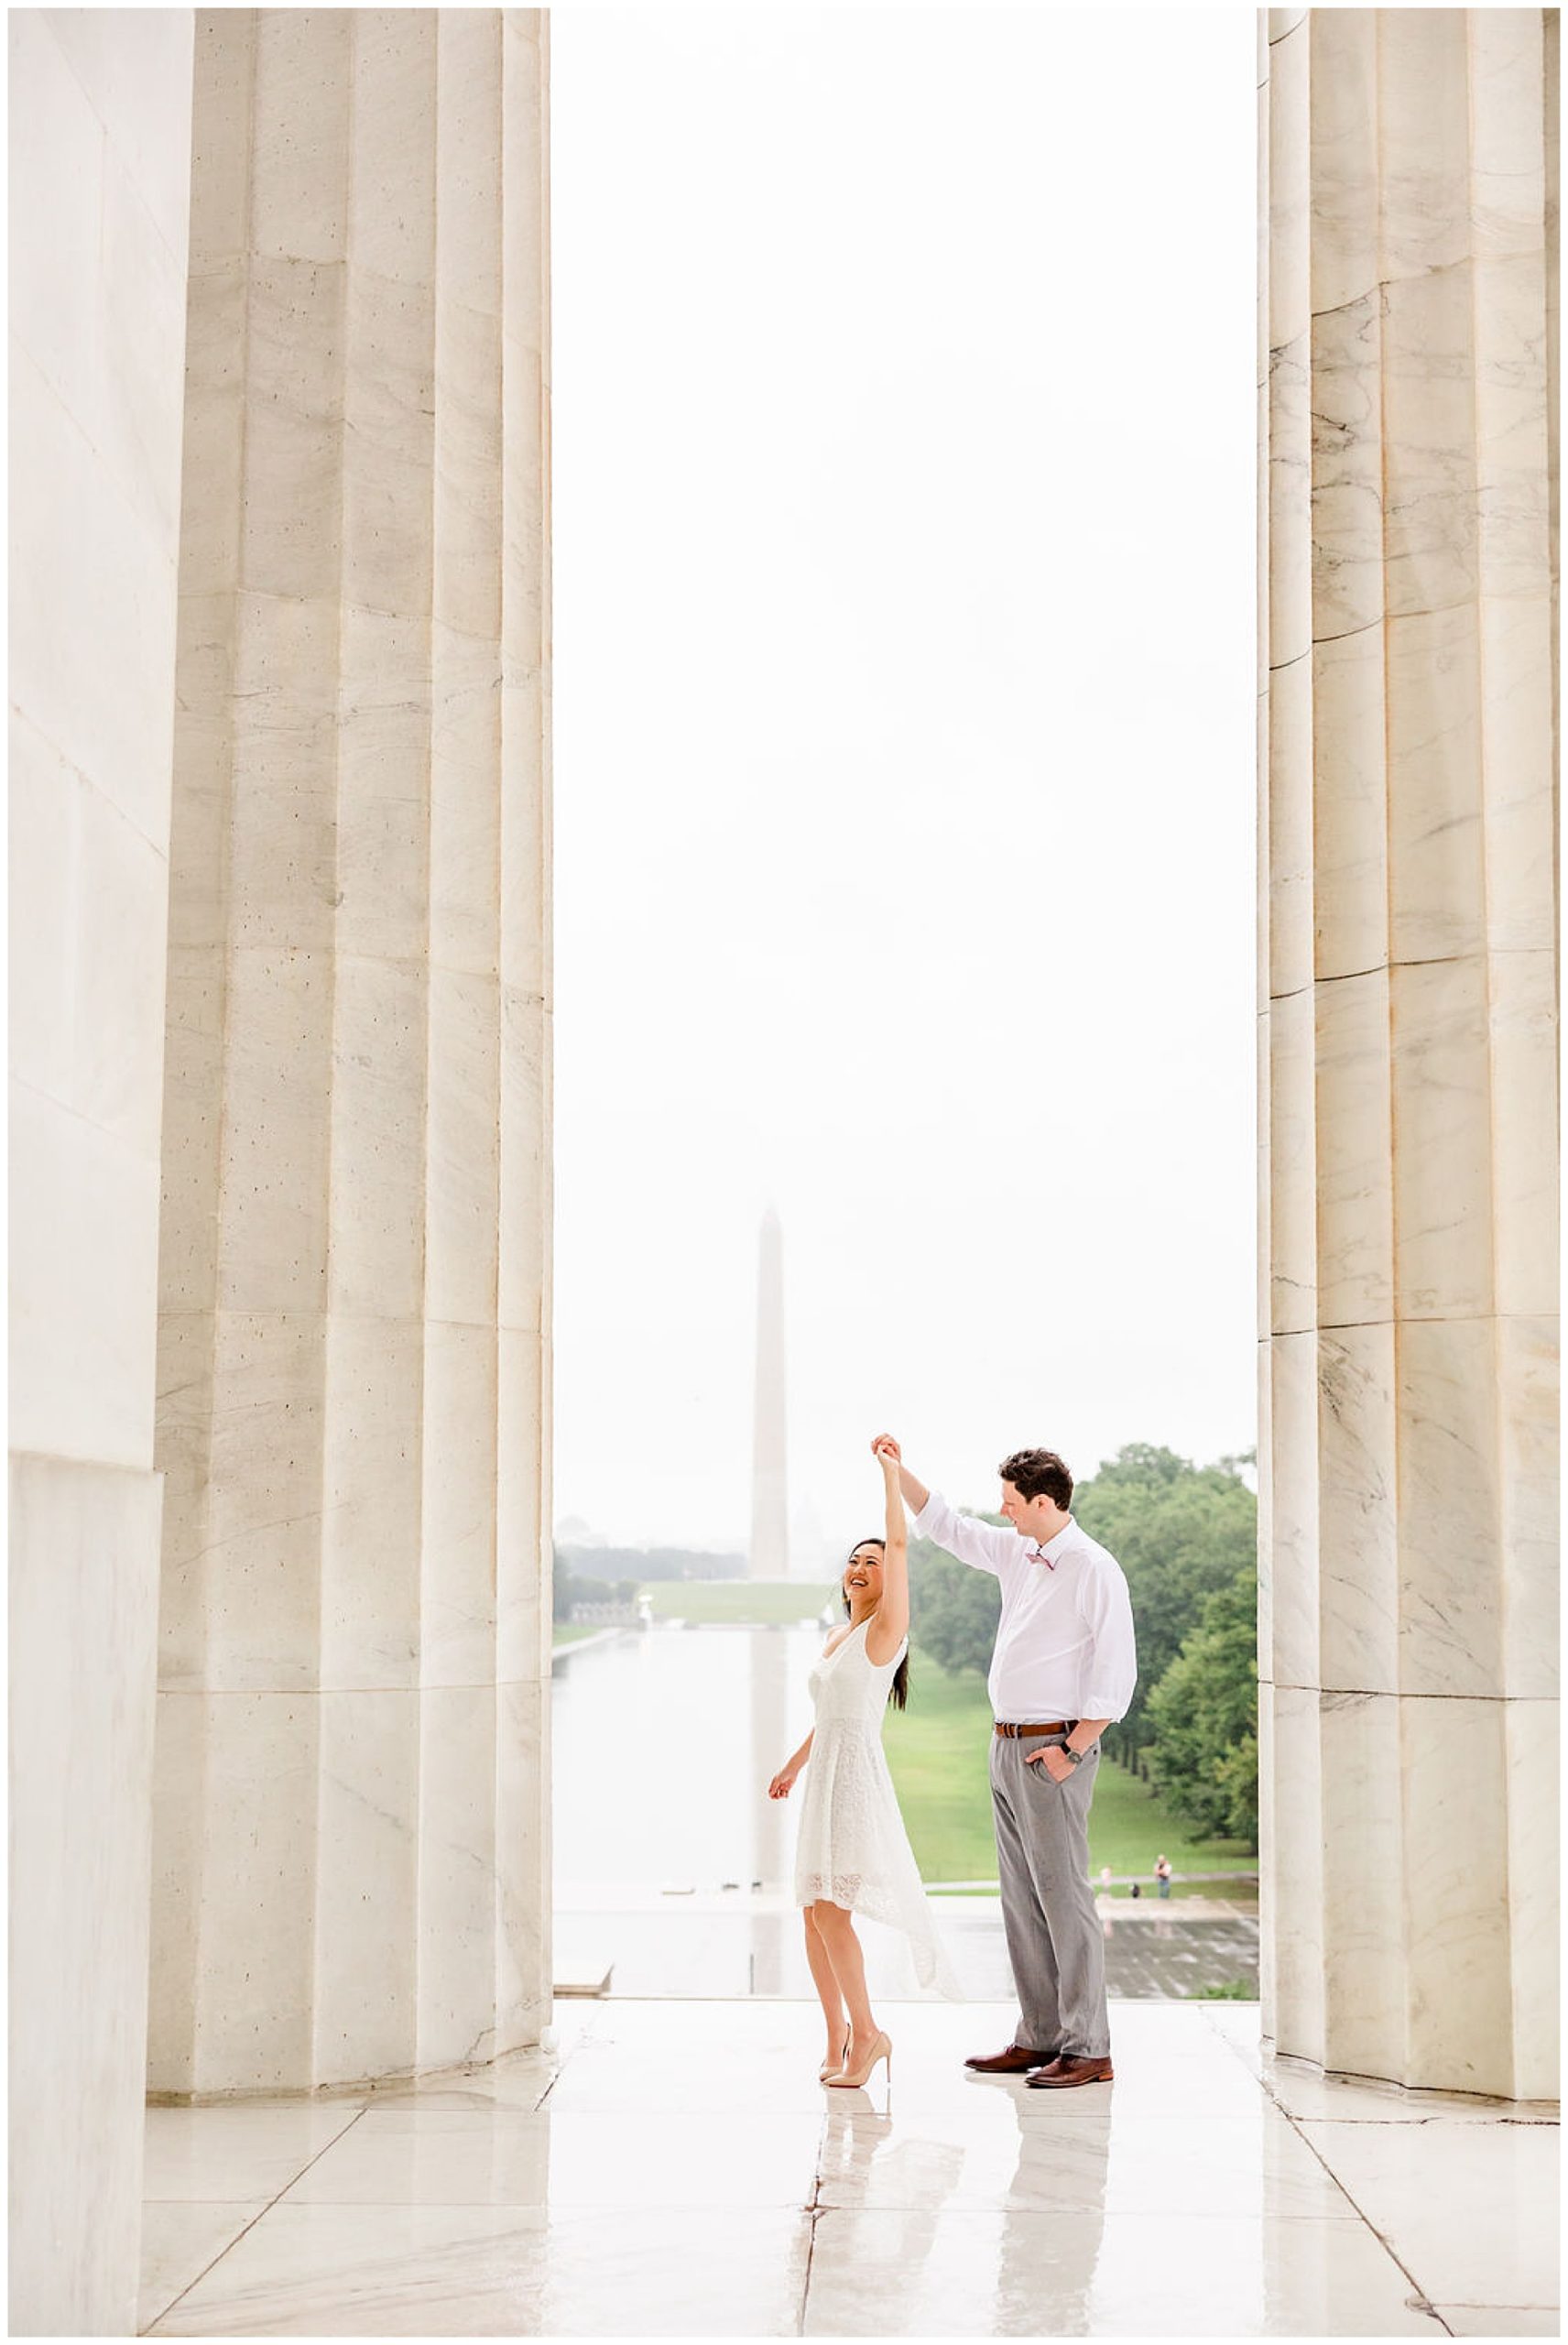 sunrise and sunset DC wedding, DC wedding photos, DC wedding portraits, micro-wedding, DC micro-wedding photography, DC micro-wedding photographer, DC petite wedding photographer, northern Virginia wedding photography, natural light wedding photography, unique wedding, Rachel E.H. Photography, man twirling woman, couple in between large marble pillars, off the shoulder white dress